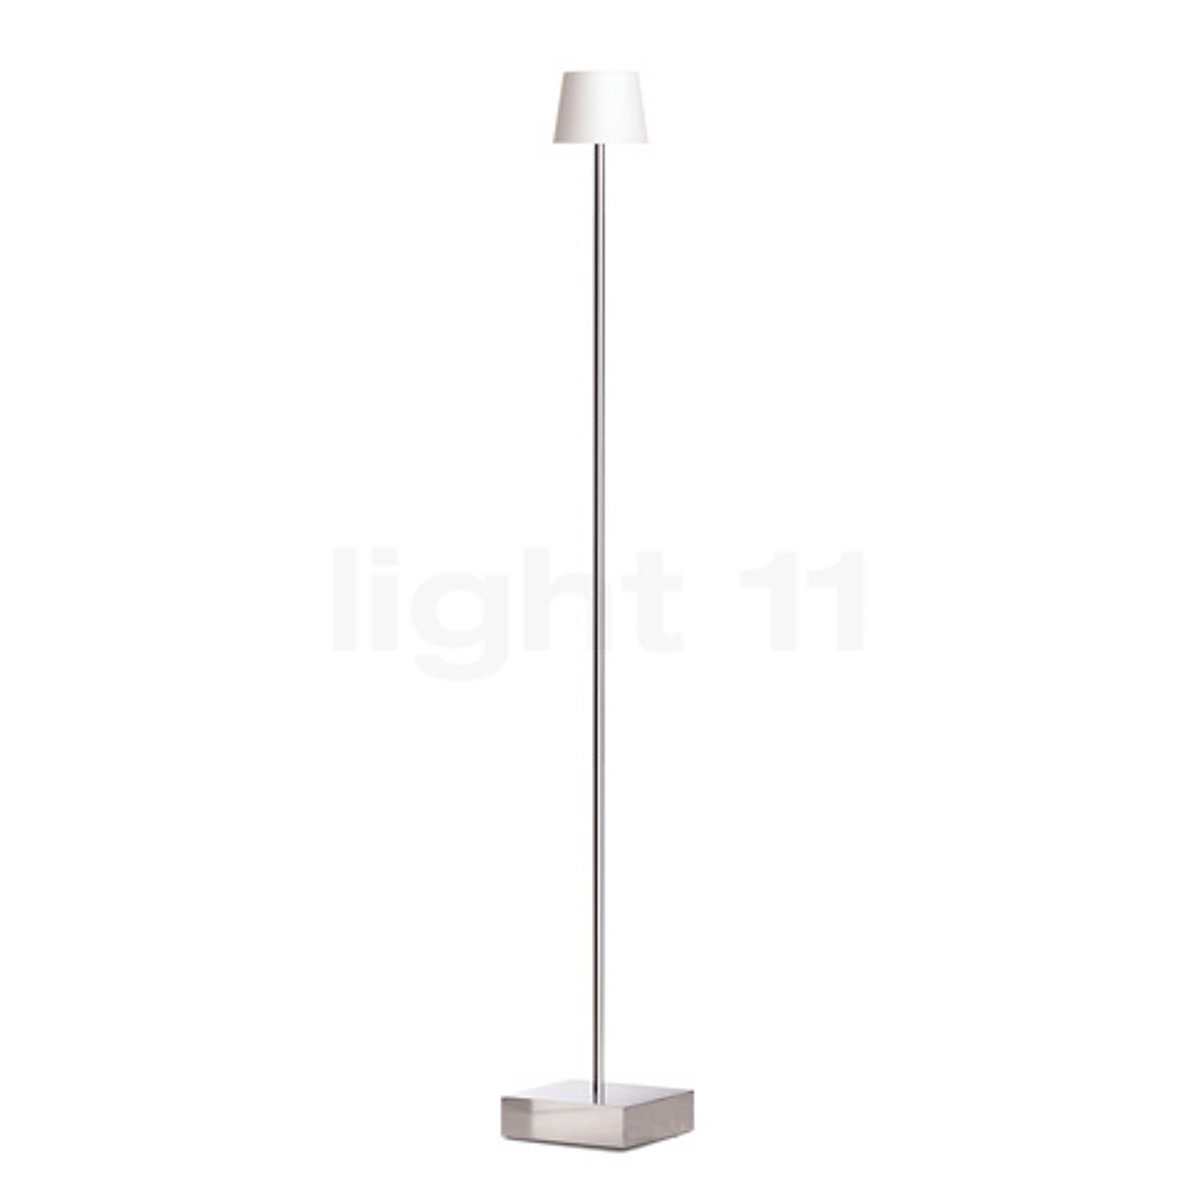 Buy Anta Cut floor lamp with touch dimmer at light11.eu